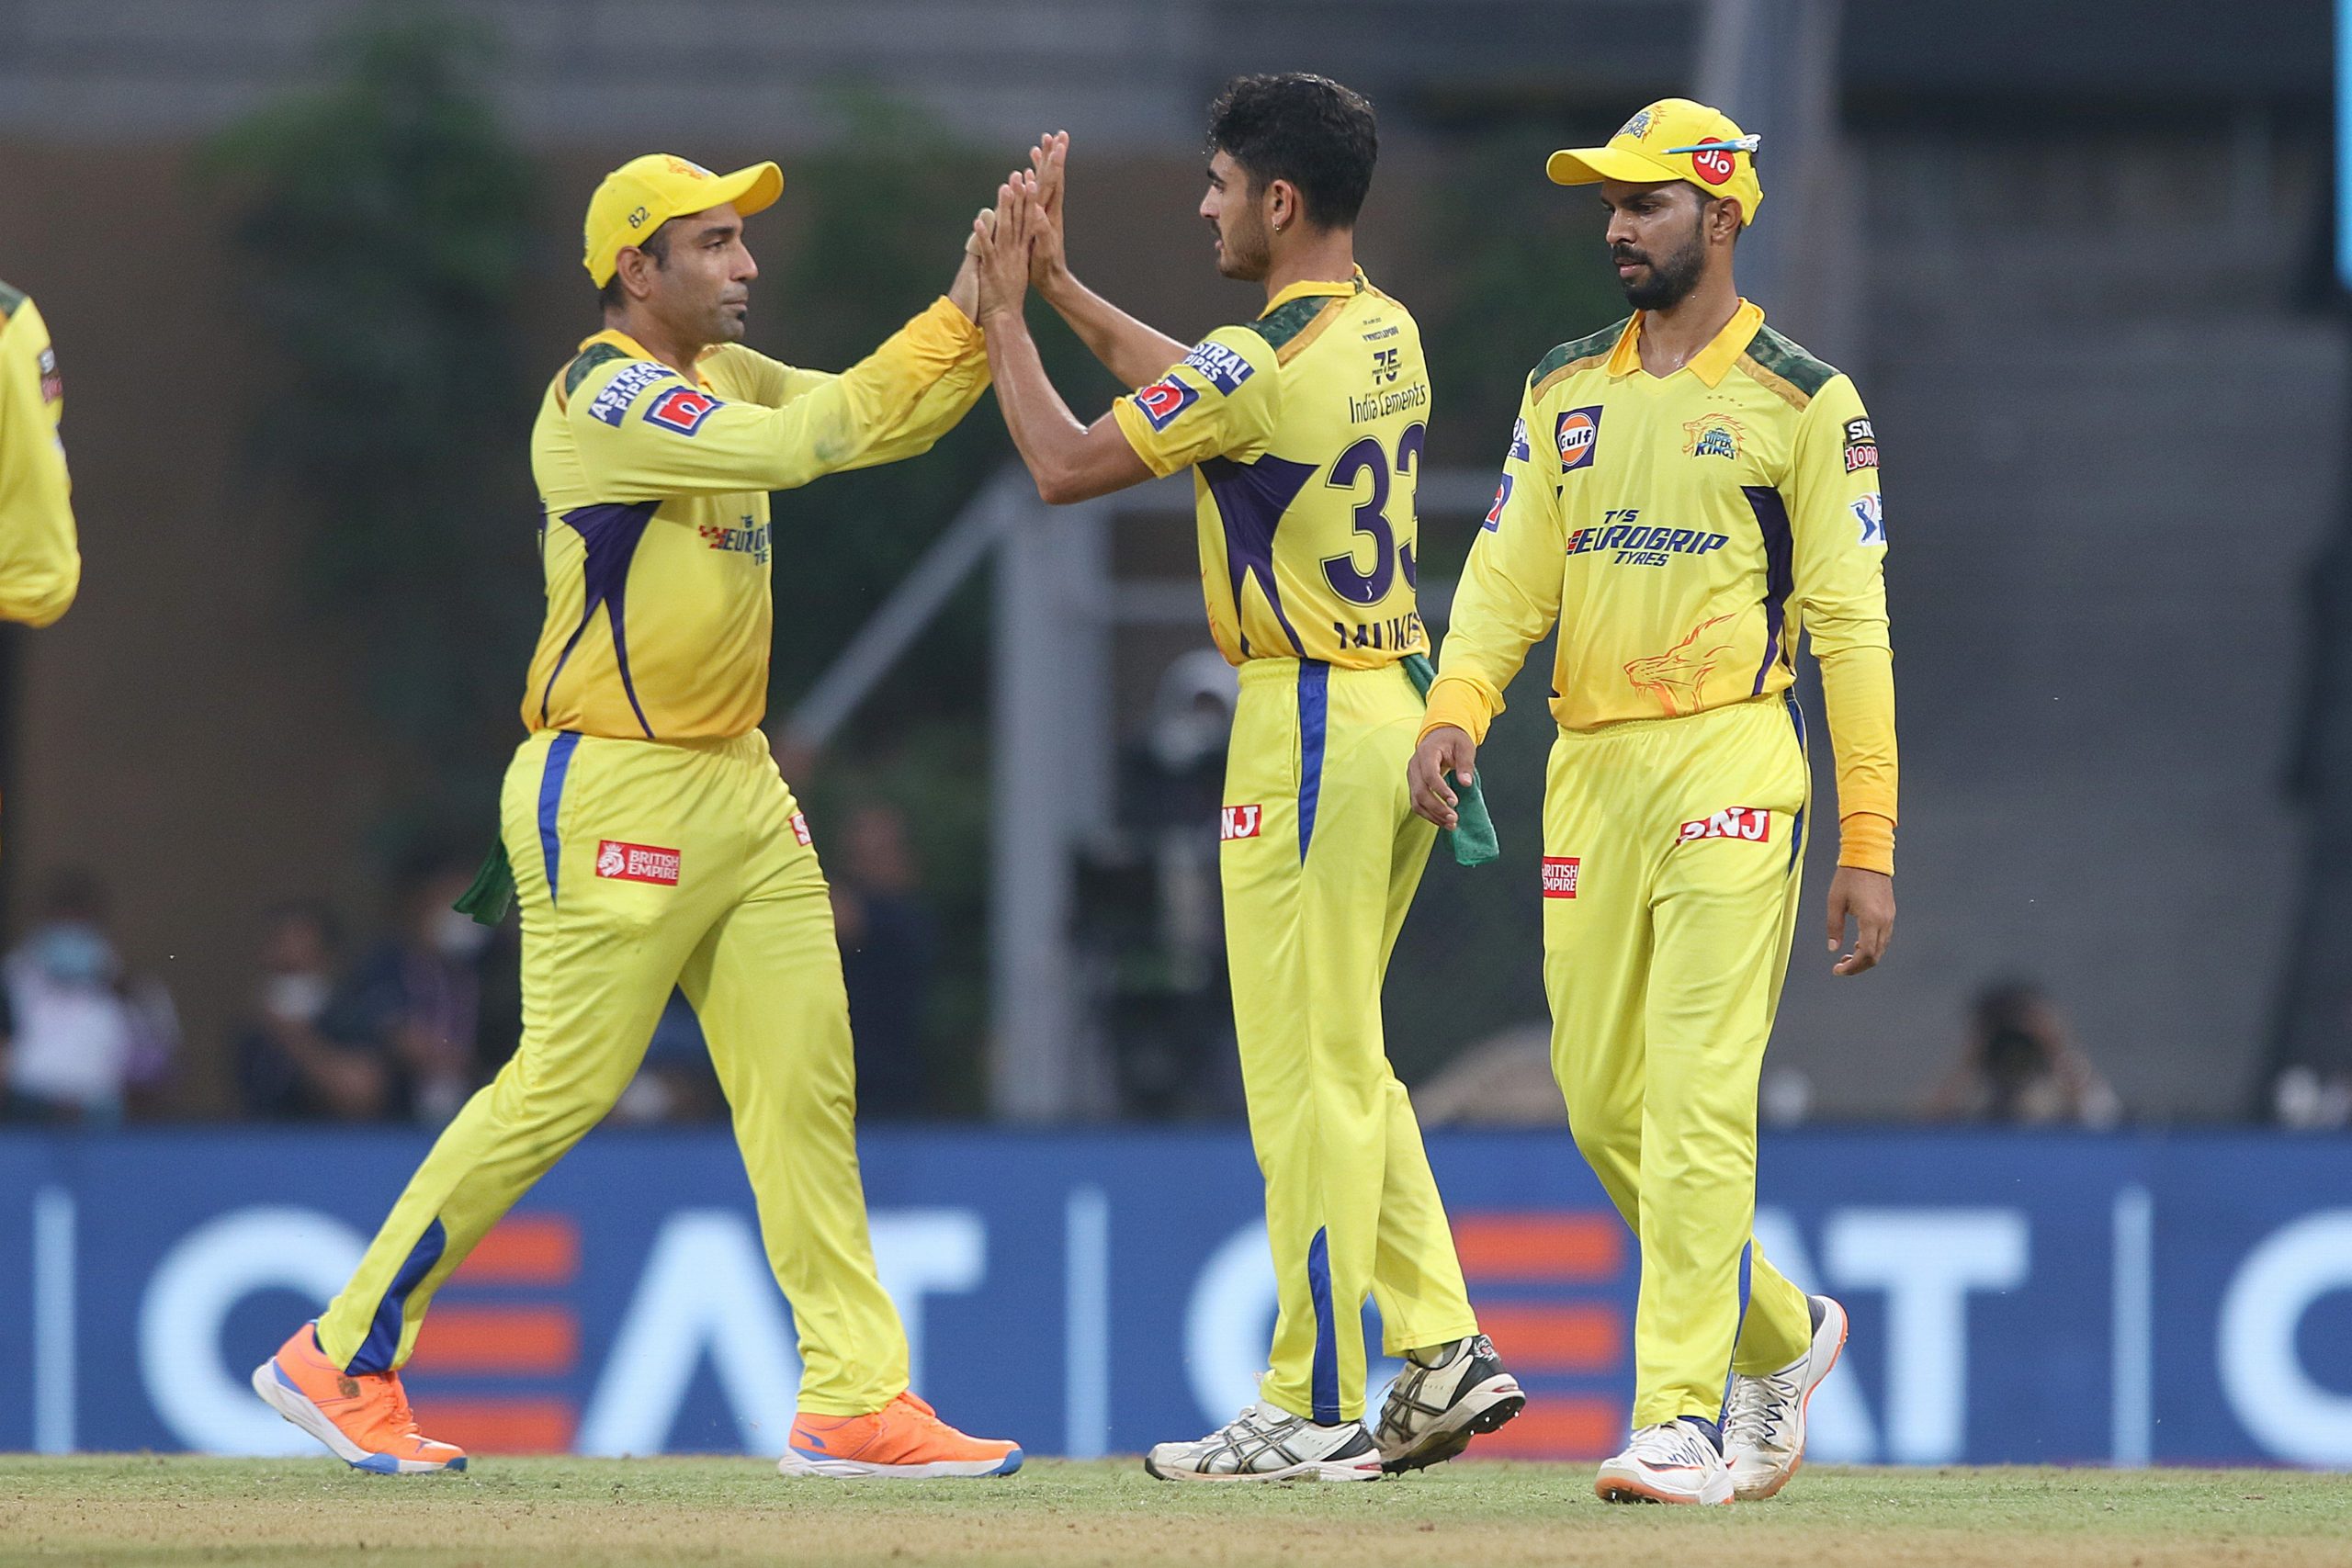 IPL 2022: Hoping for first win, CSK take on rampant RCB